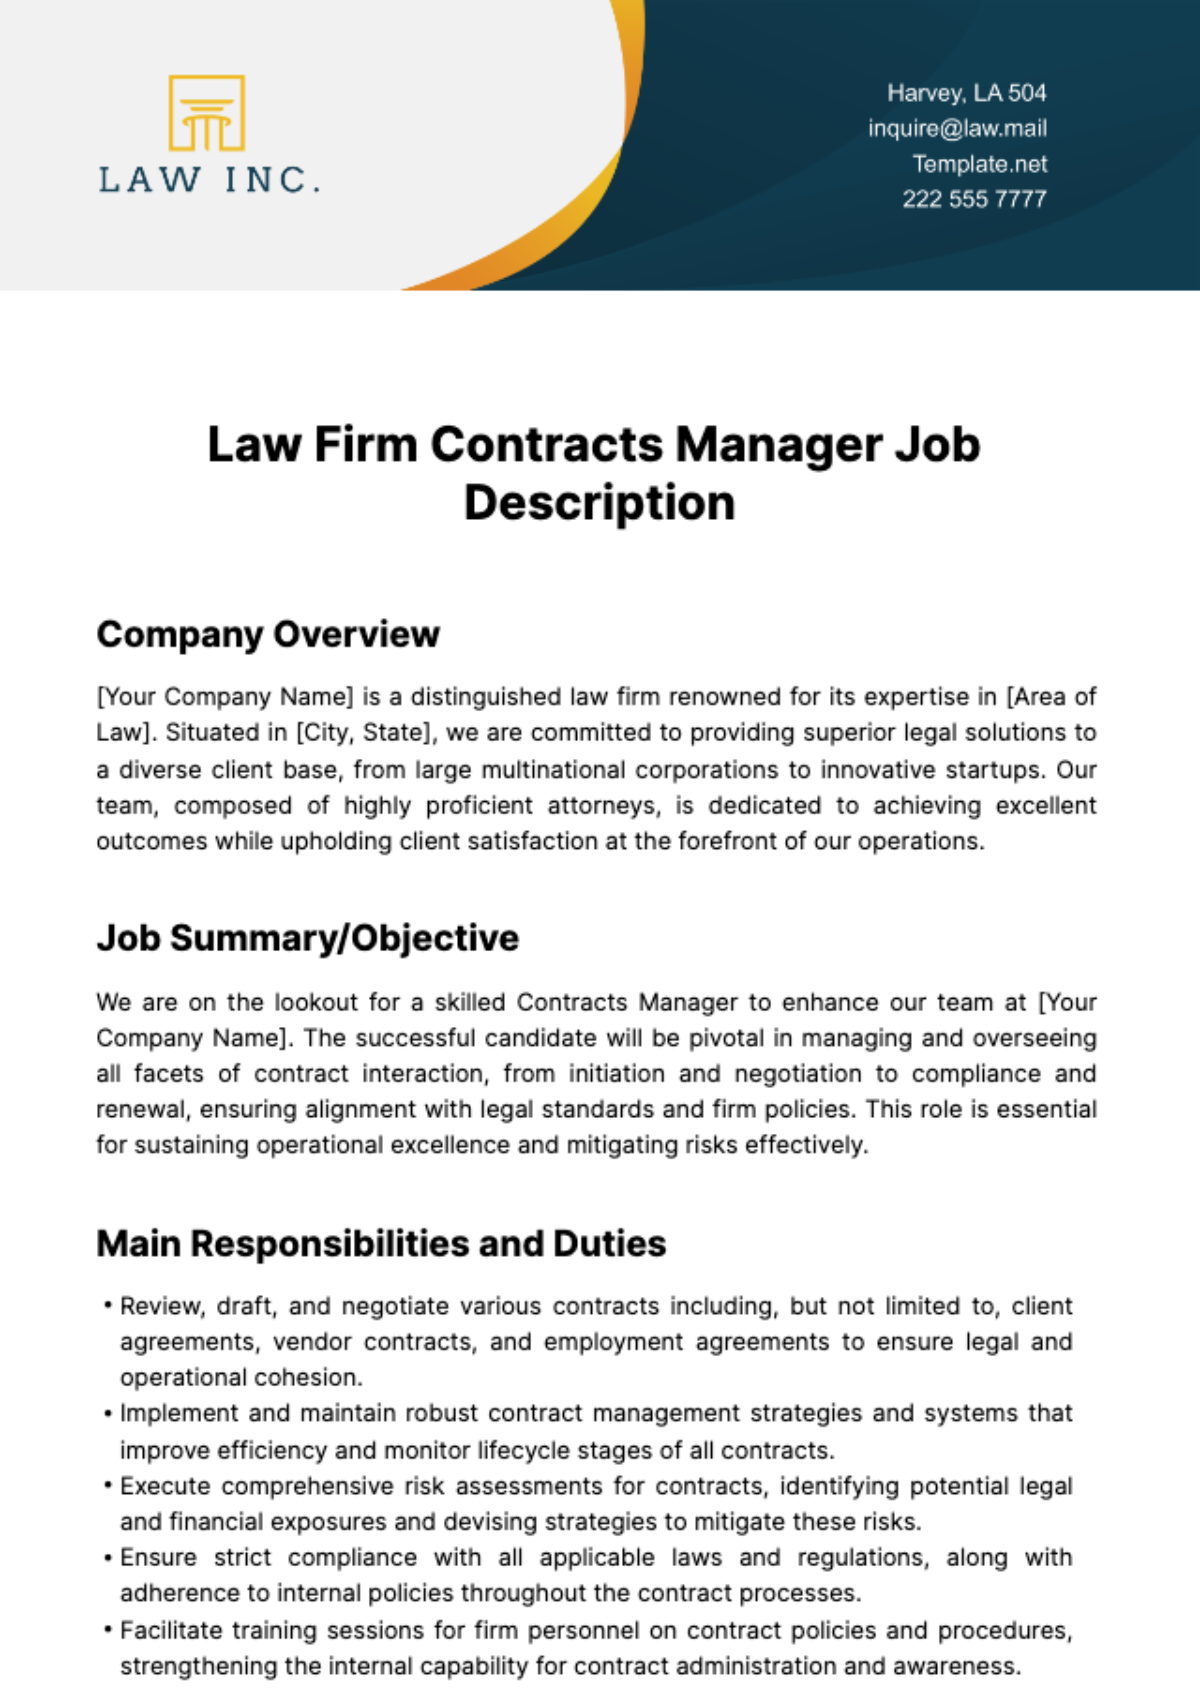 Law Firm Contracts Manager Job Description Template